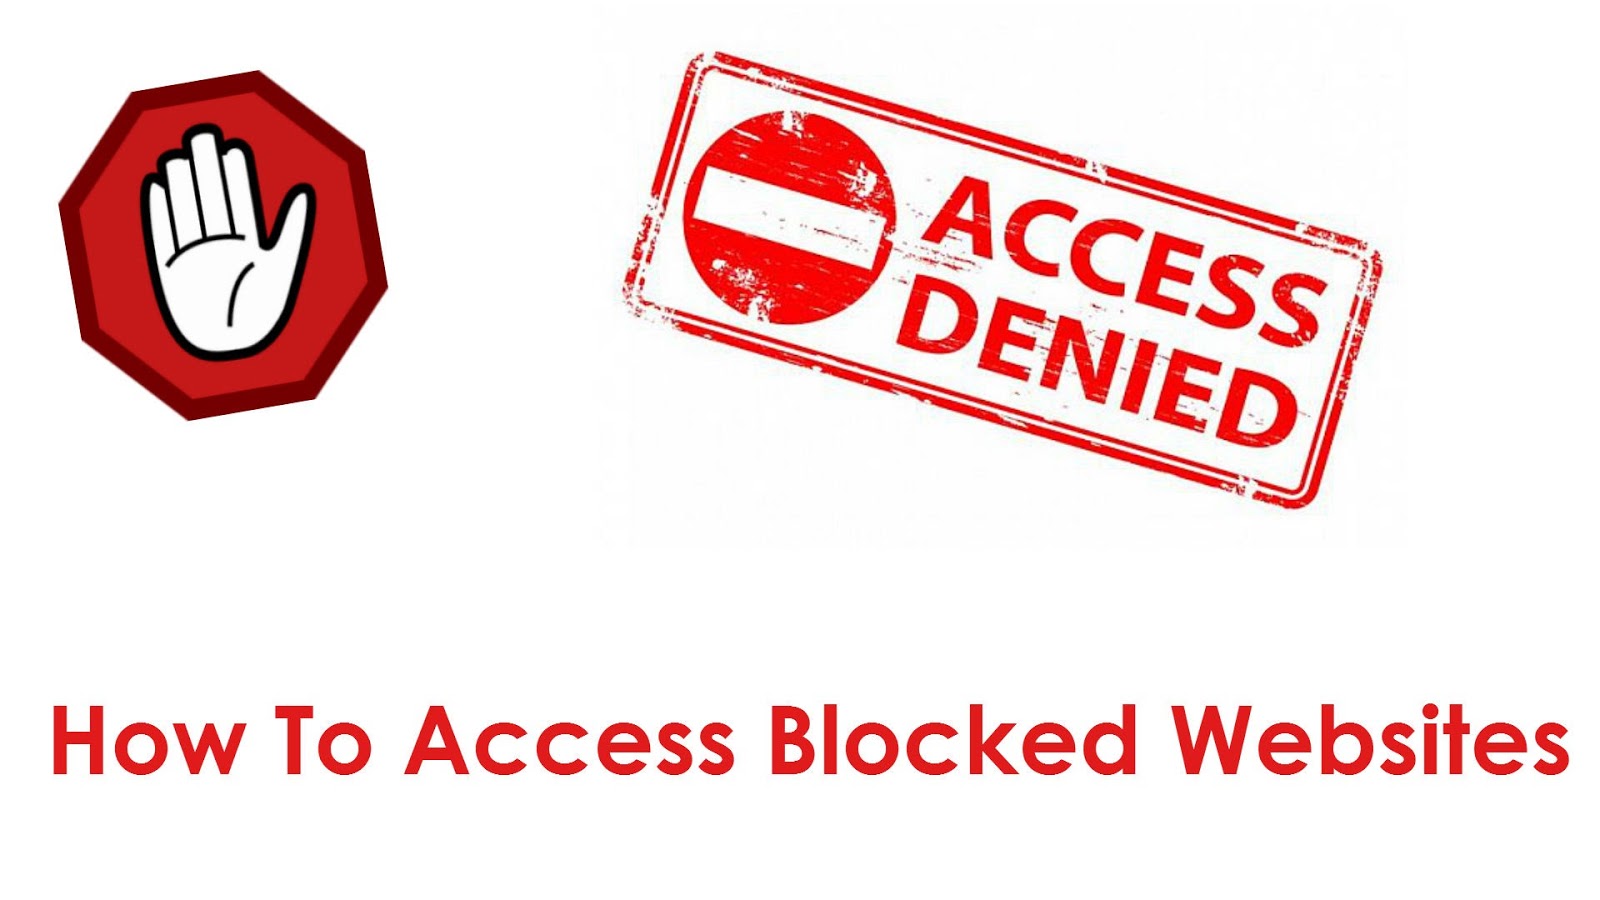 Youtube com restricted access blocked 2. Access blocked. Site blocked. Blocked website. Blocked websites access.